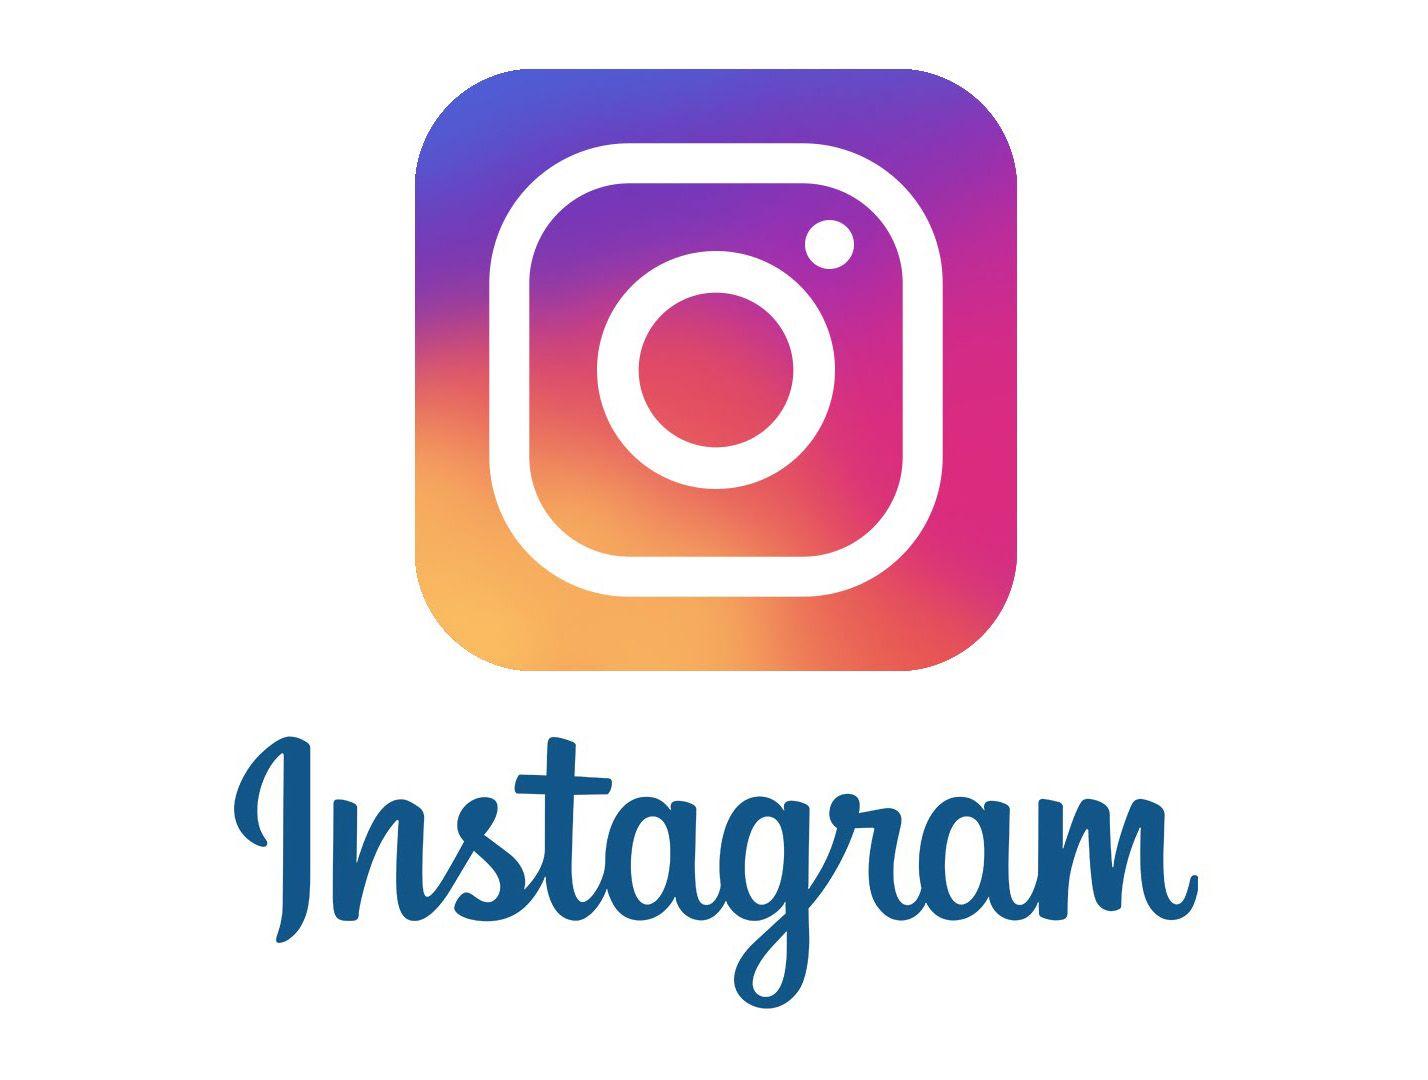 Google Instagram Logo - Instagram Logo, Instagram Symbol Meaning, History and Evolution